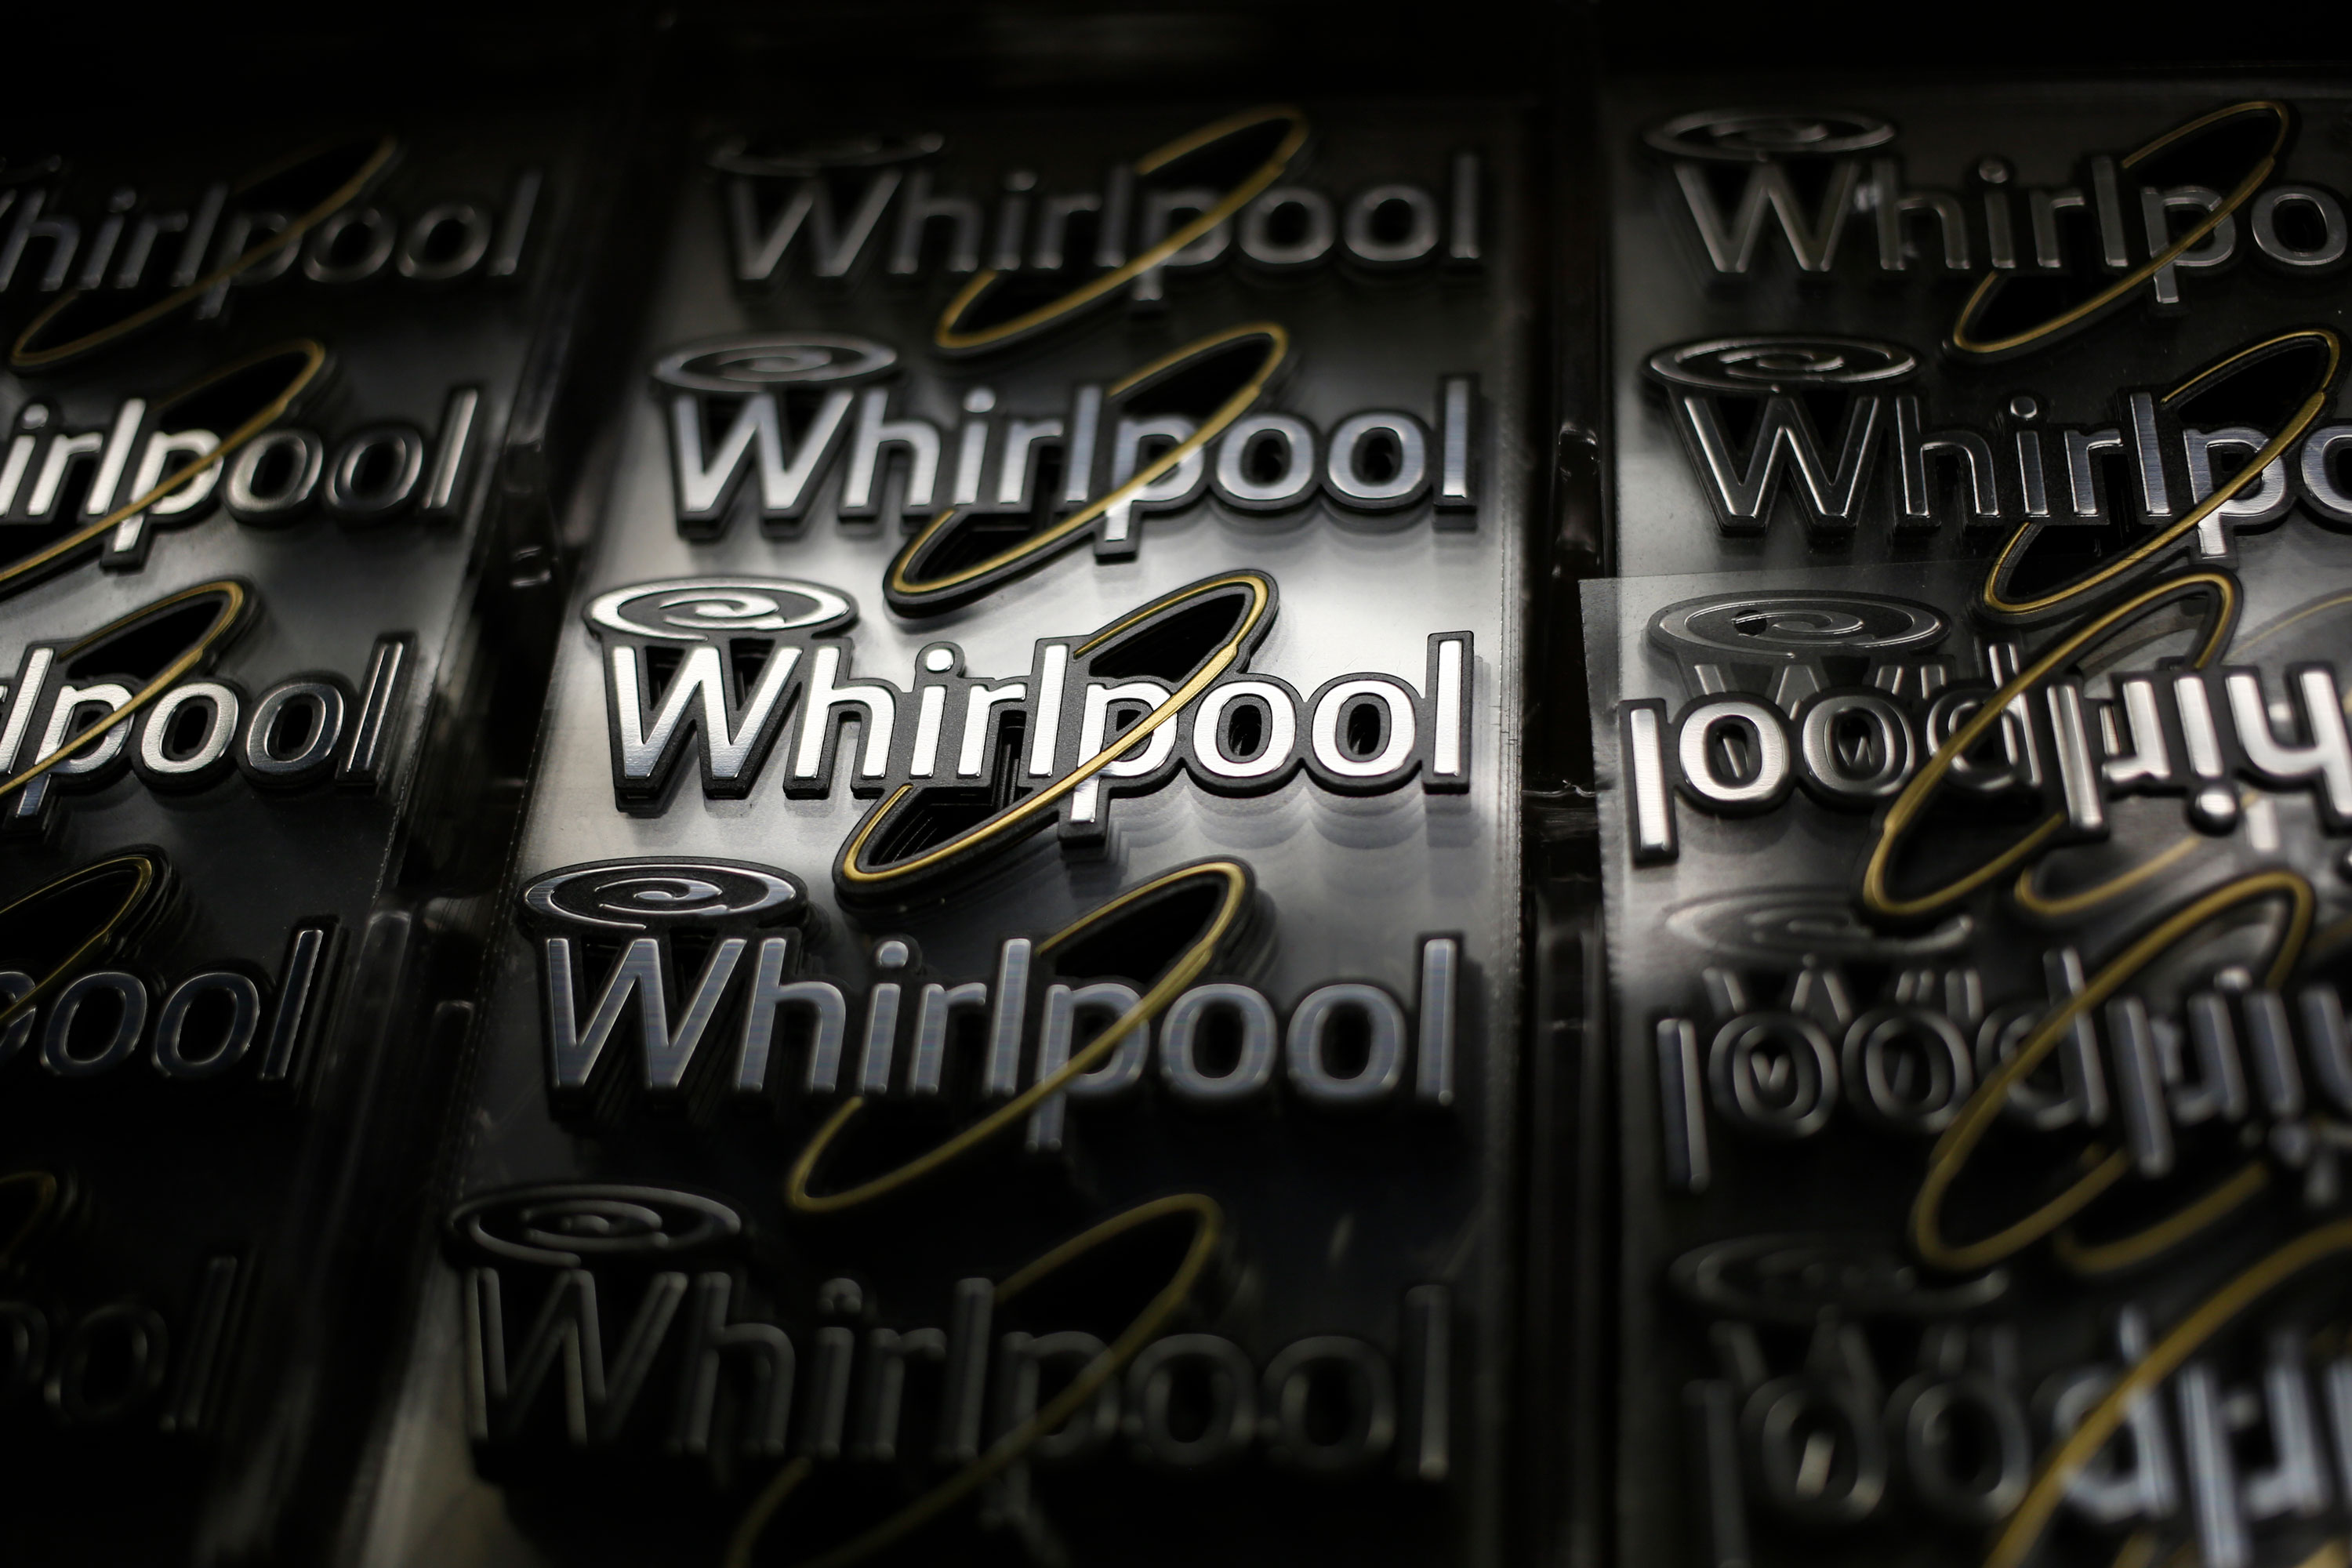 Whirlpool logos are seen before being attached to washing machines at the company's manufacturing facility in Clyde, Ohio, in 2015.